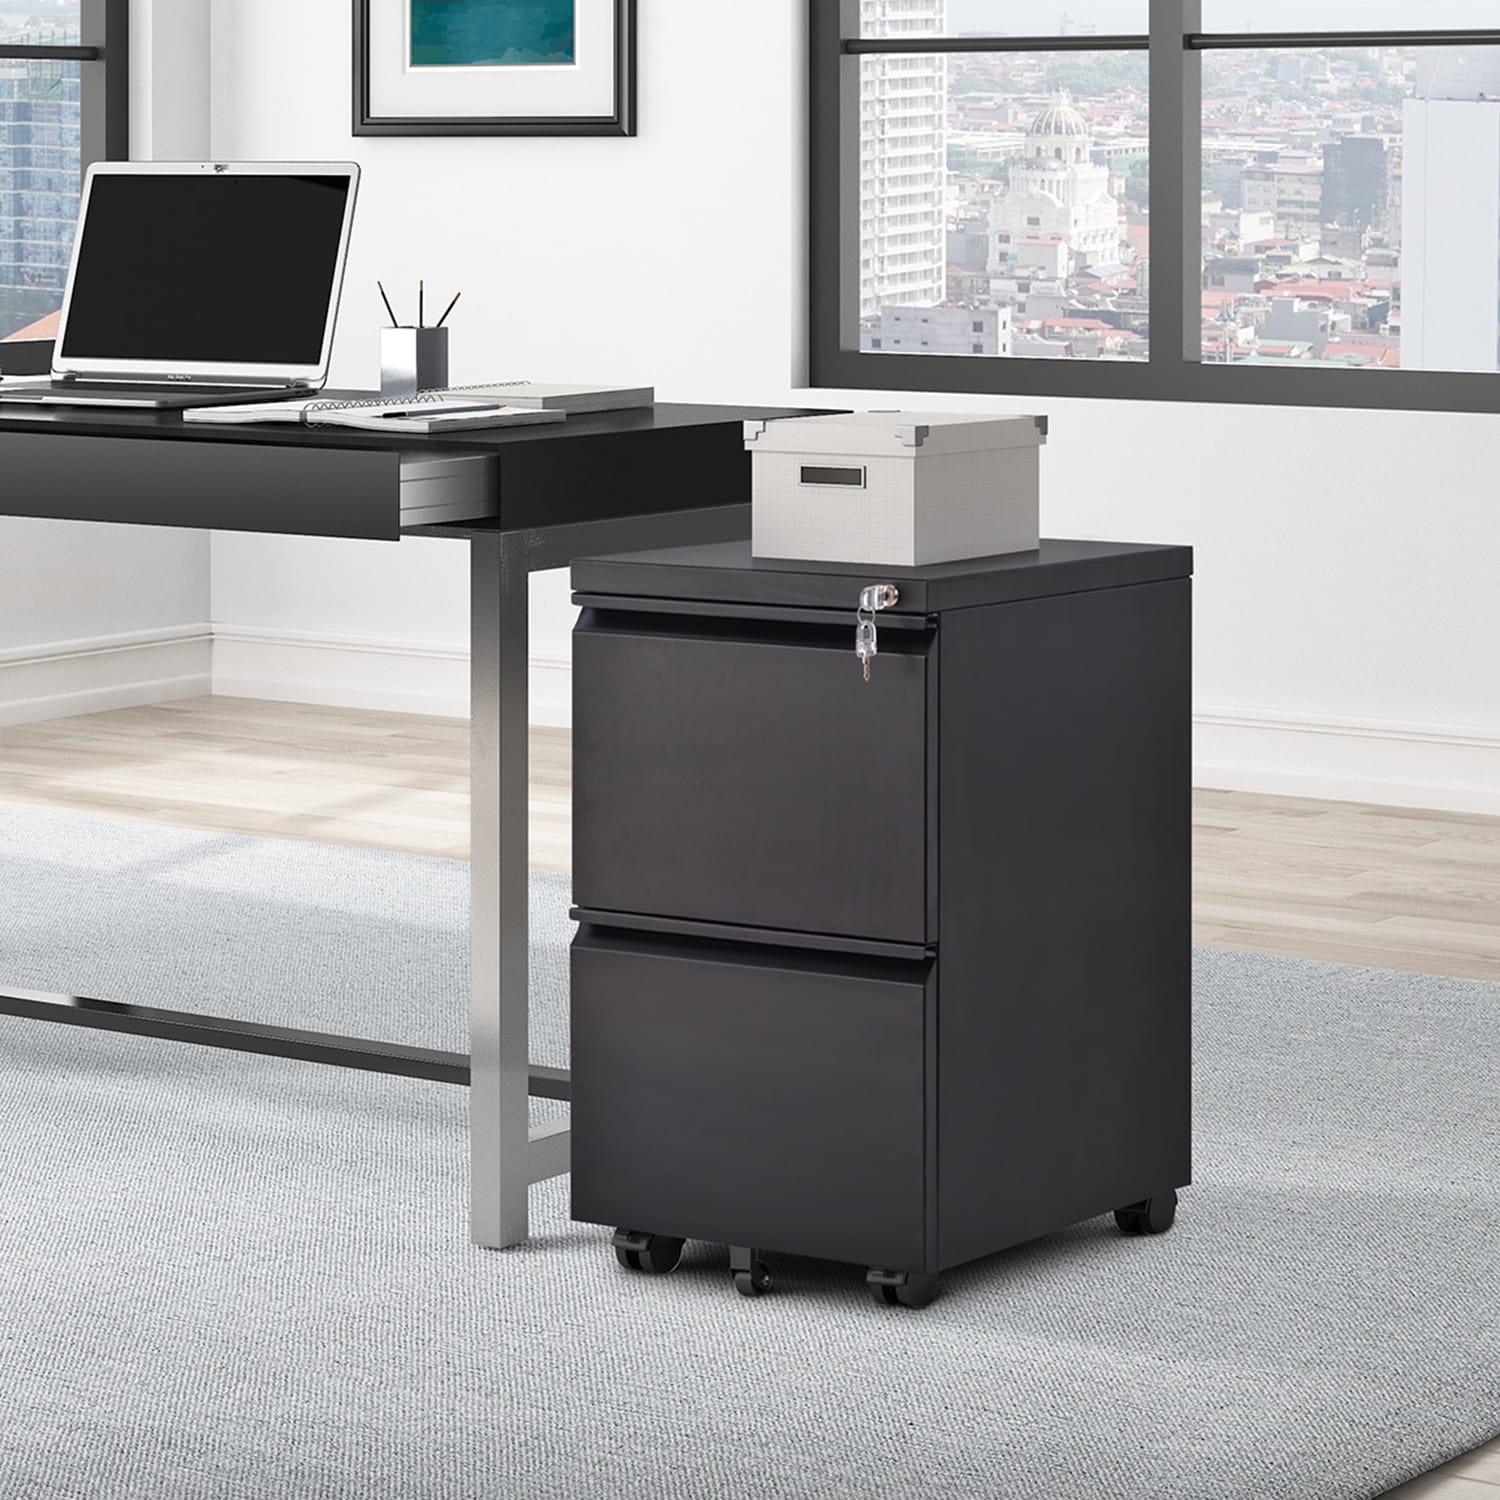 Filing cabinet Office Furniture at Lowes.com